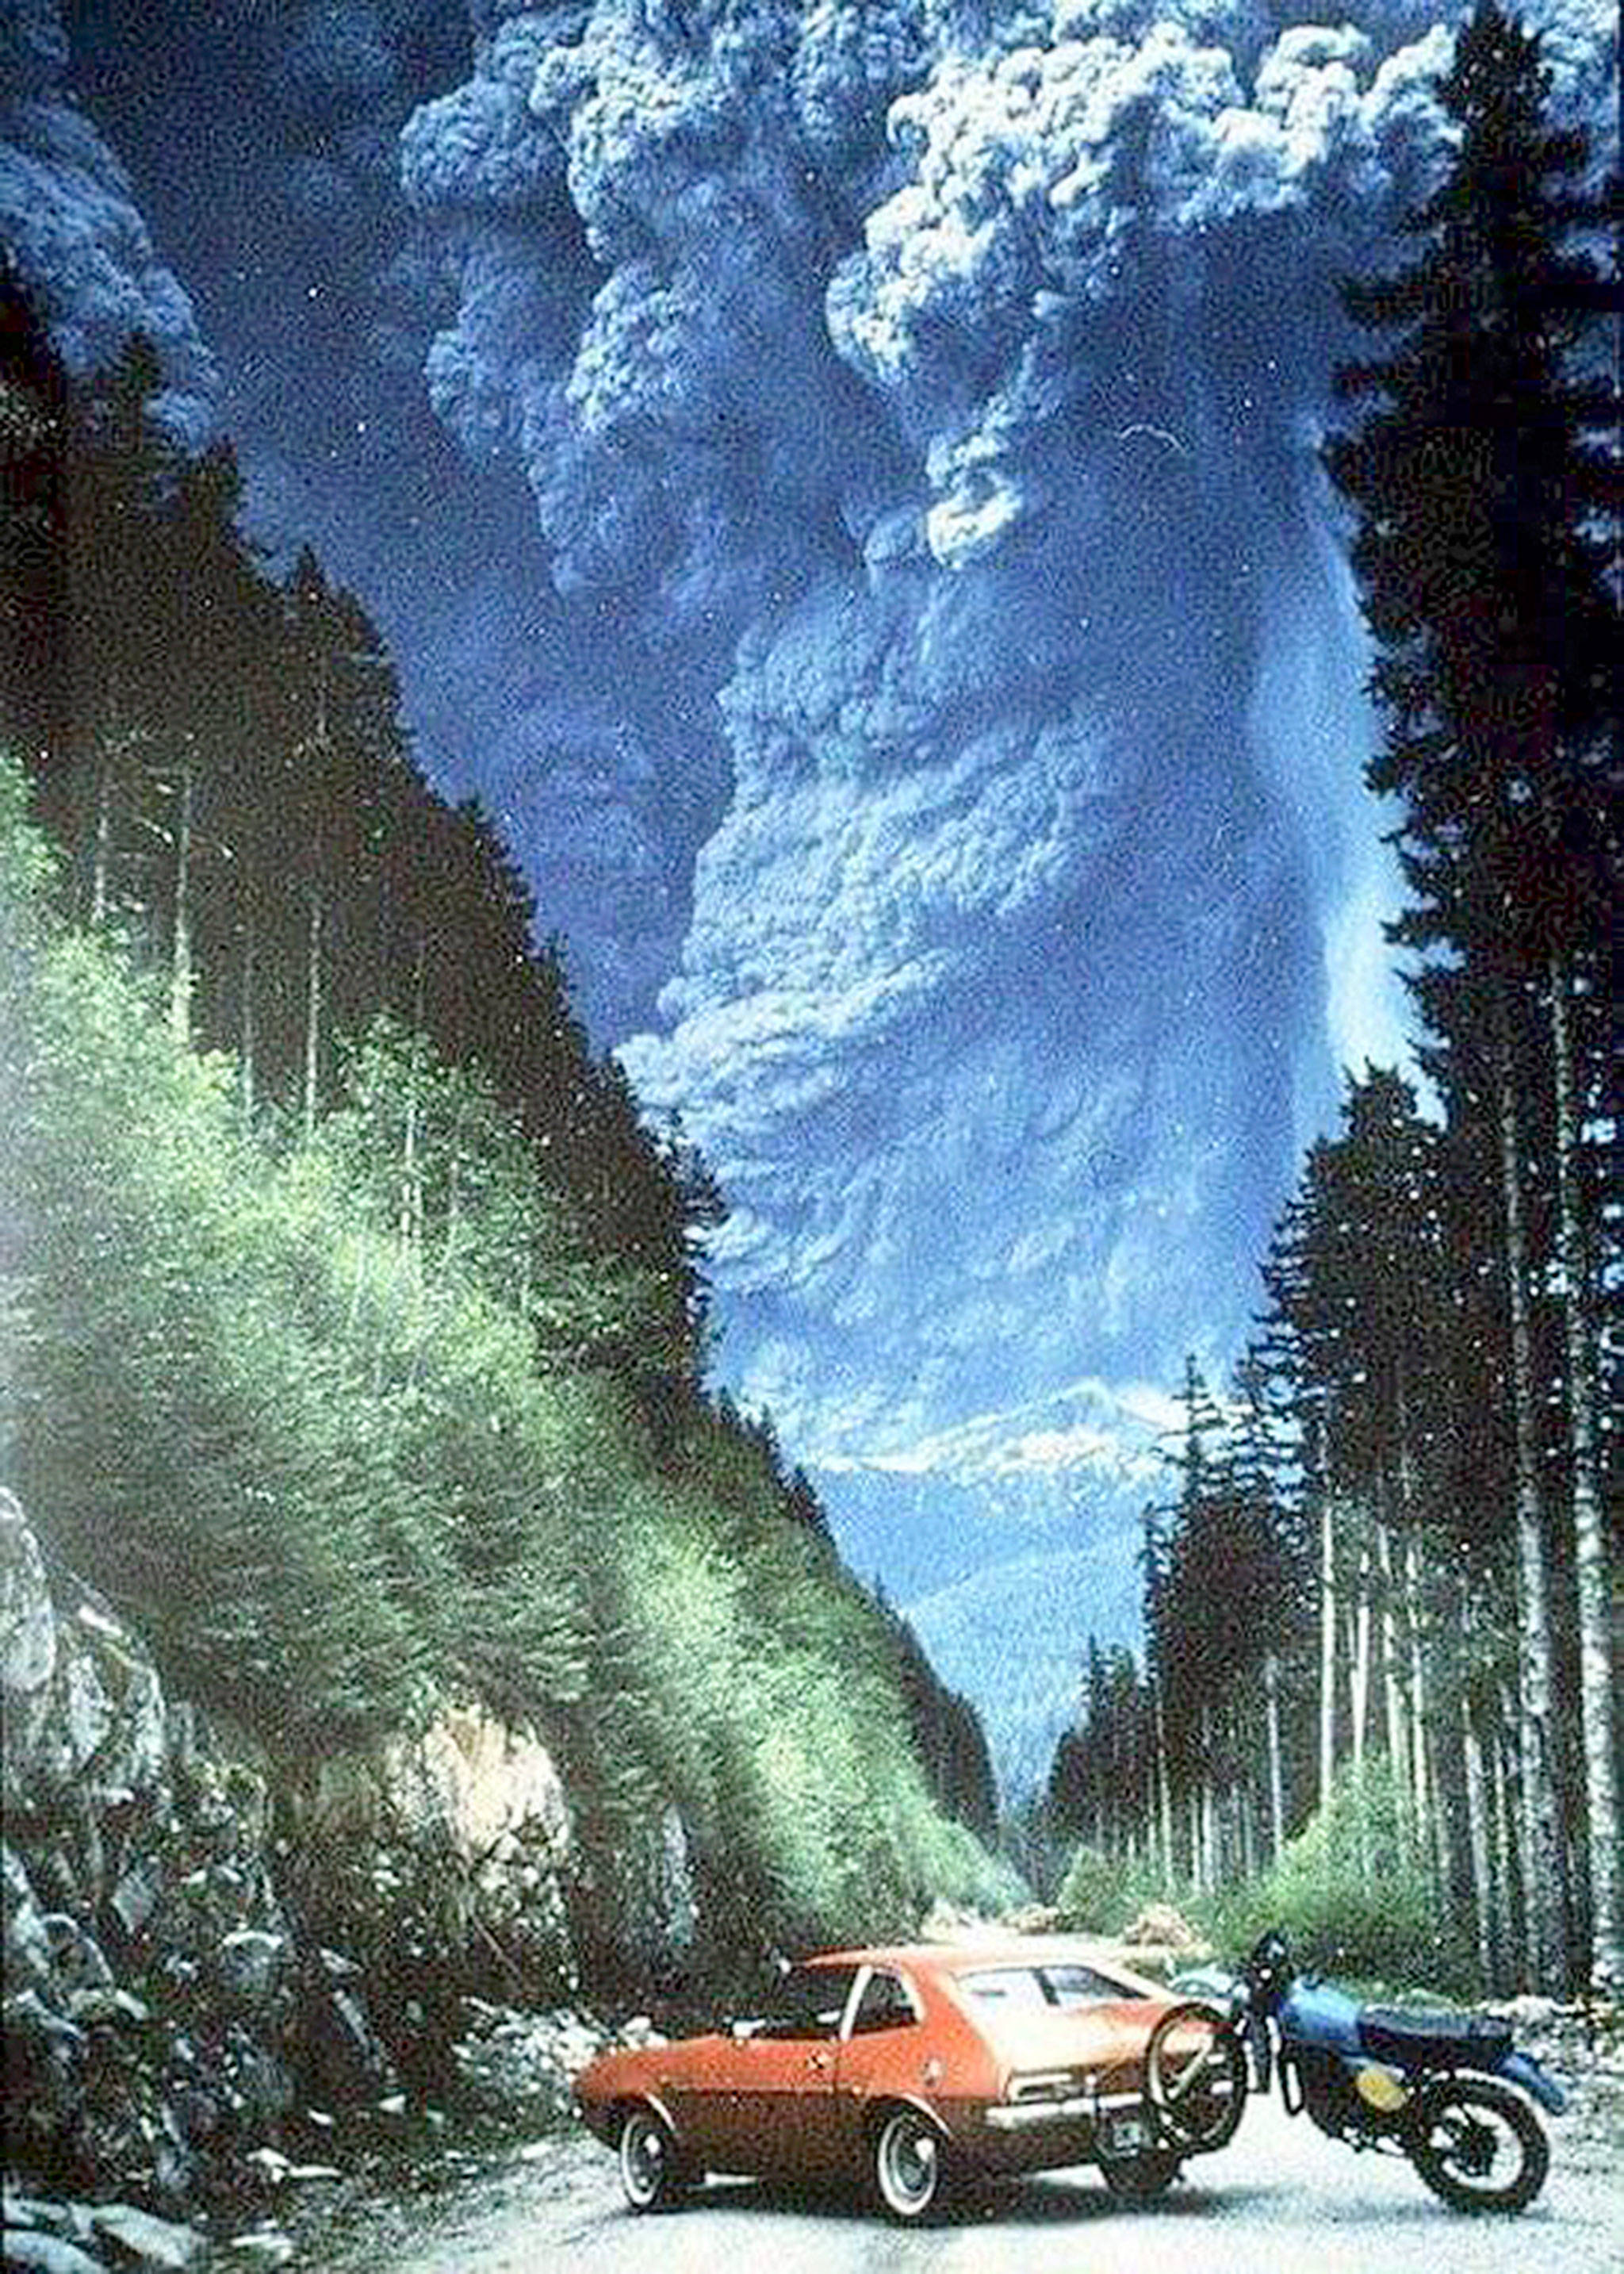 This photo of an erupting Mount St. Helens has been published and viewed widely on television over the years since the billowing plume dumped untold tons of powered volcanic ash over a dozen states. The photo was posted May 18 — the 38th anniversary of Mount St. Helens’ eruption — on Facebook by Michael S. Keys, whose good friend took the photo of the erupting volcano with his car and hitched motorcycle in the foreground. (posted by Michael S. Keys on Facebook)